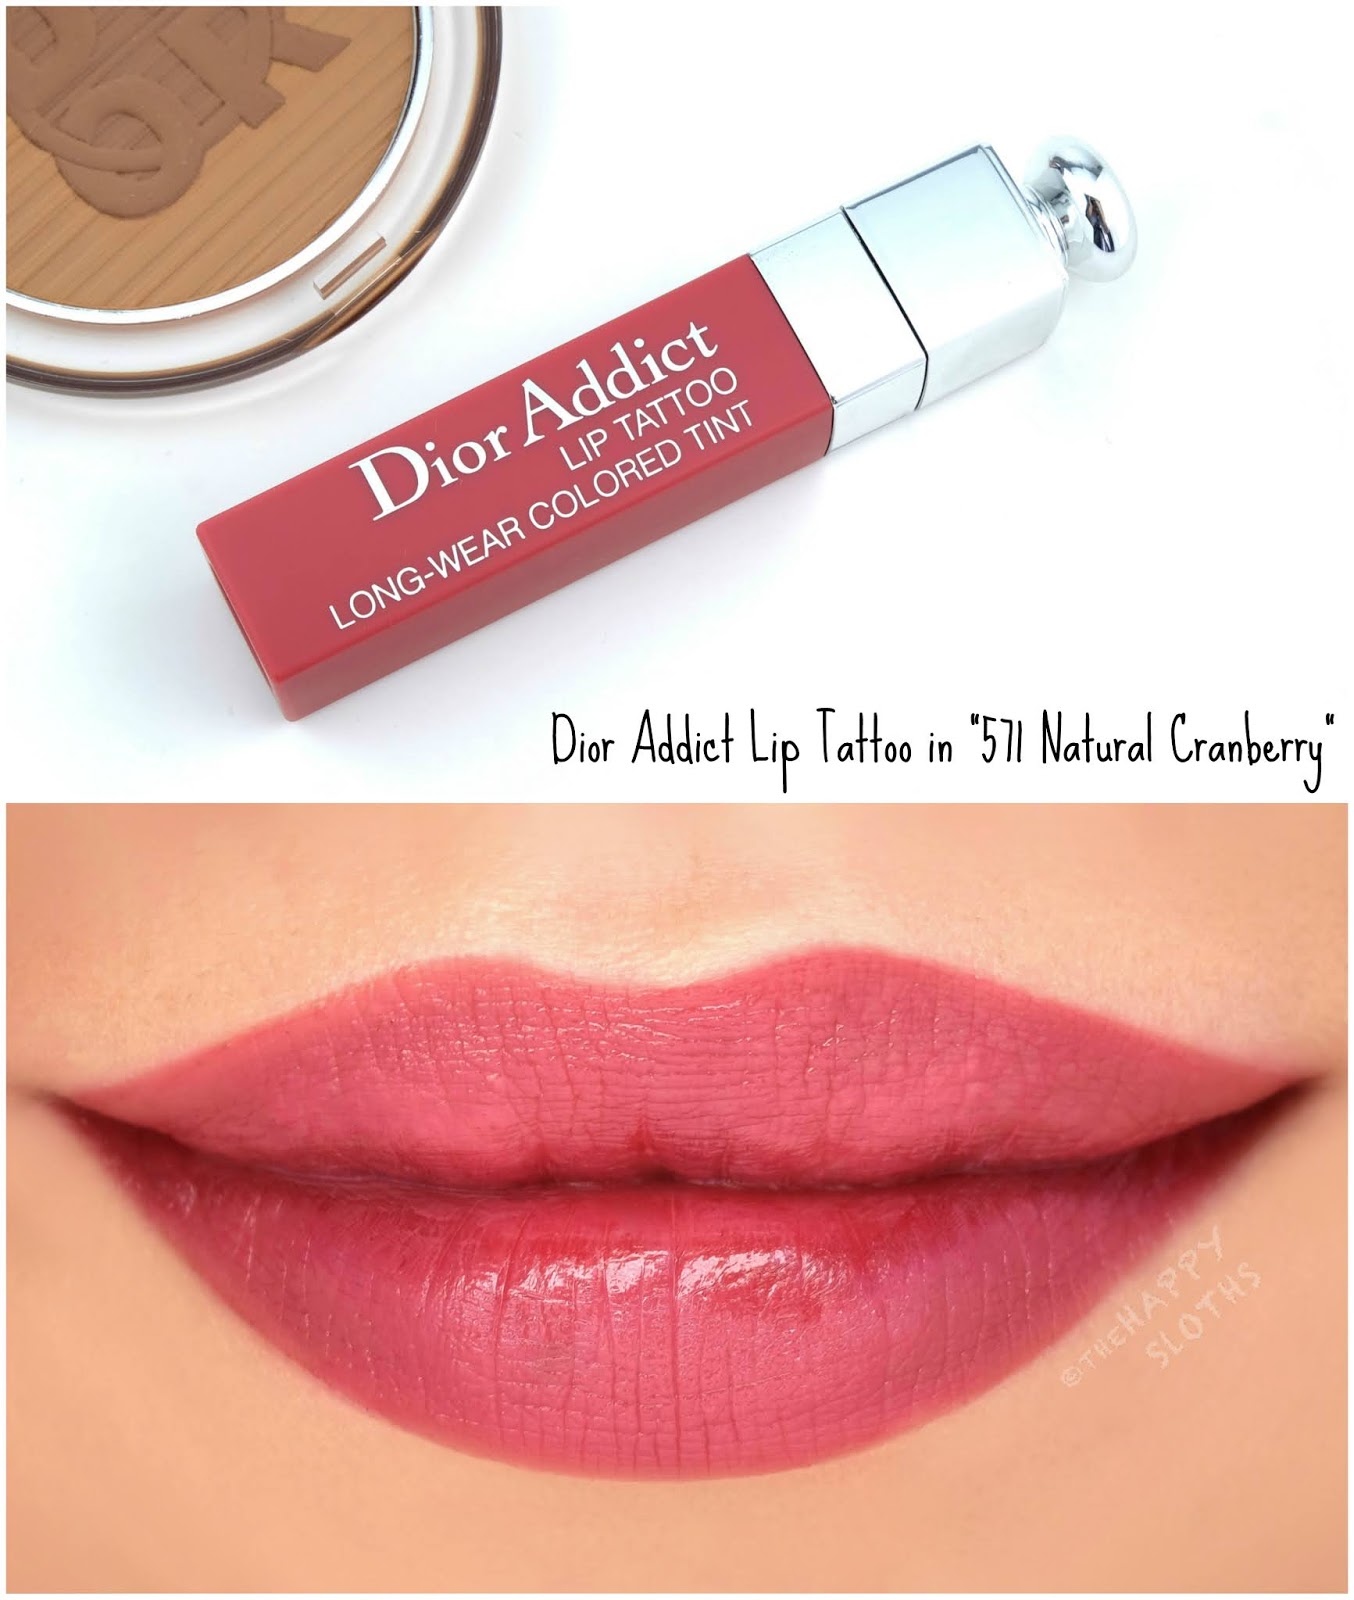 Dior Summer 2020 | Dior Addict Lip Tattoo in "571 Natural Cranberry": Review and Swatches